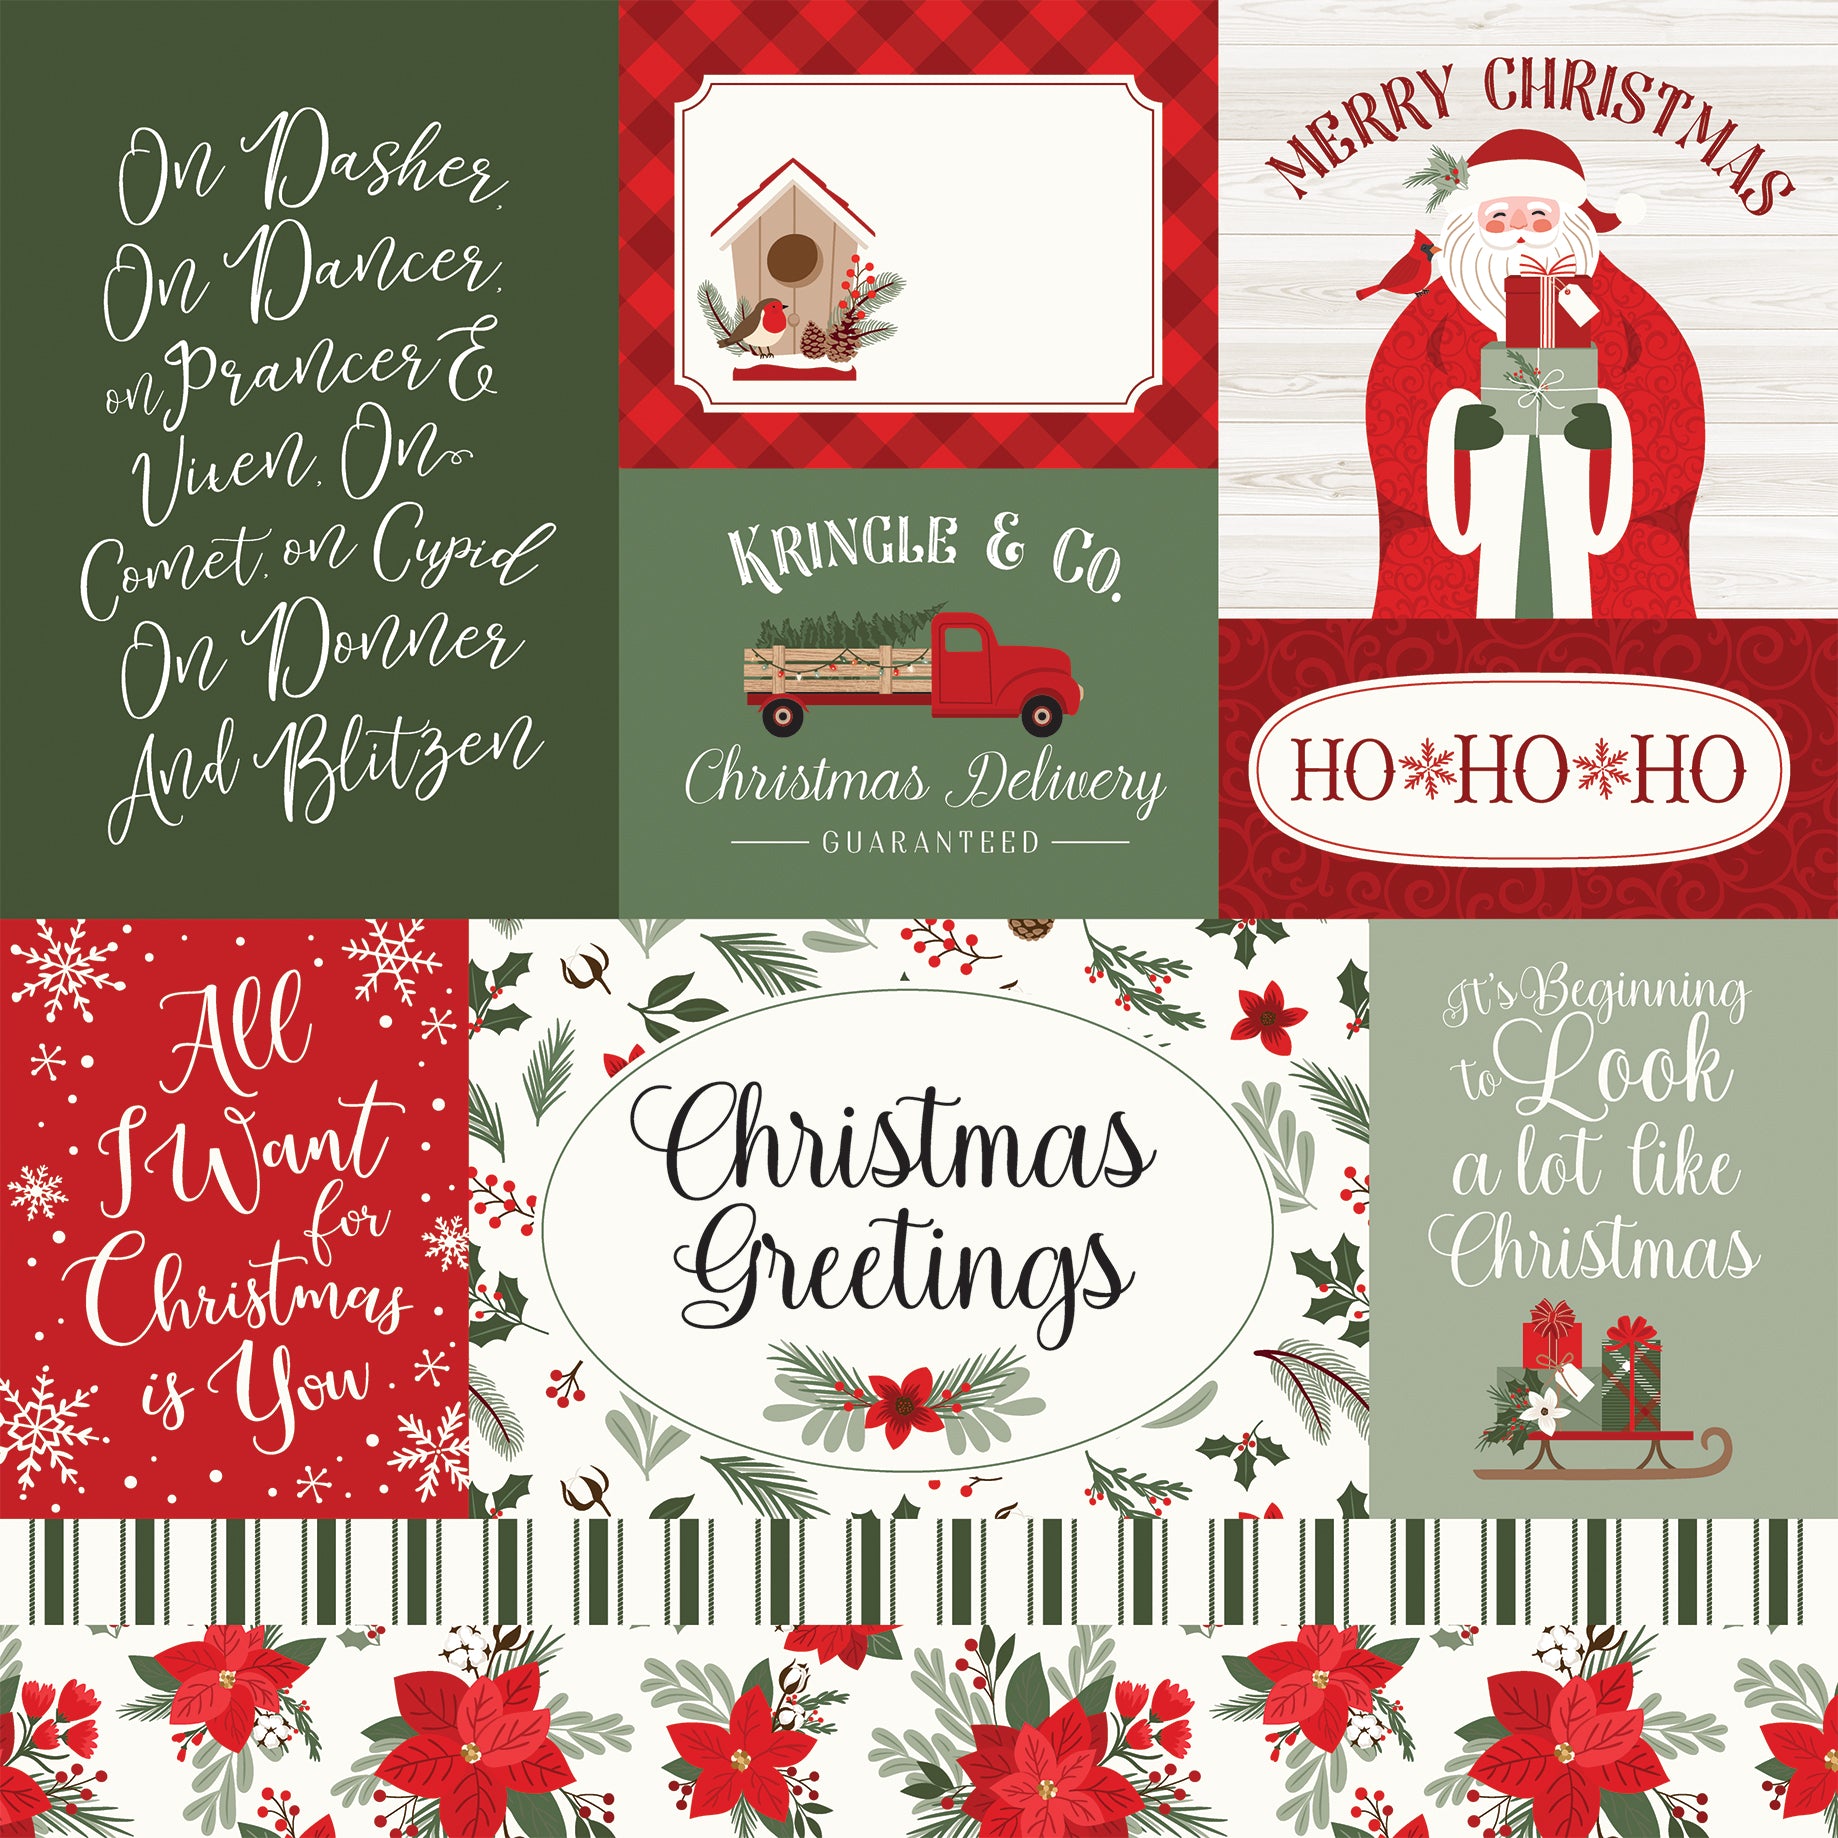 Christmas Time Collection Multi Journaling Cards 12 x 12 Double-Sided Scrapbook Paper by Echo Park Paper